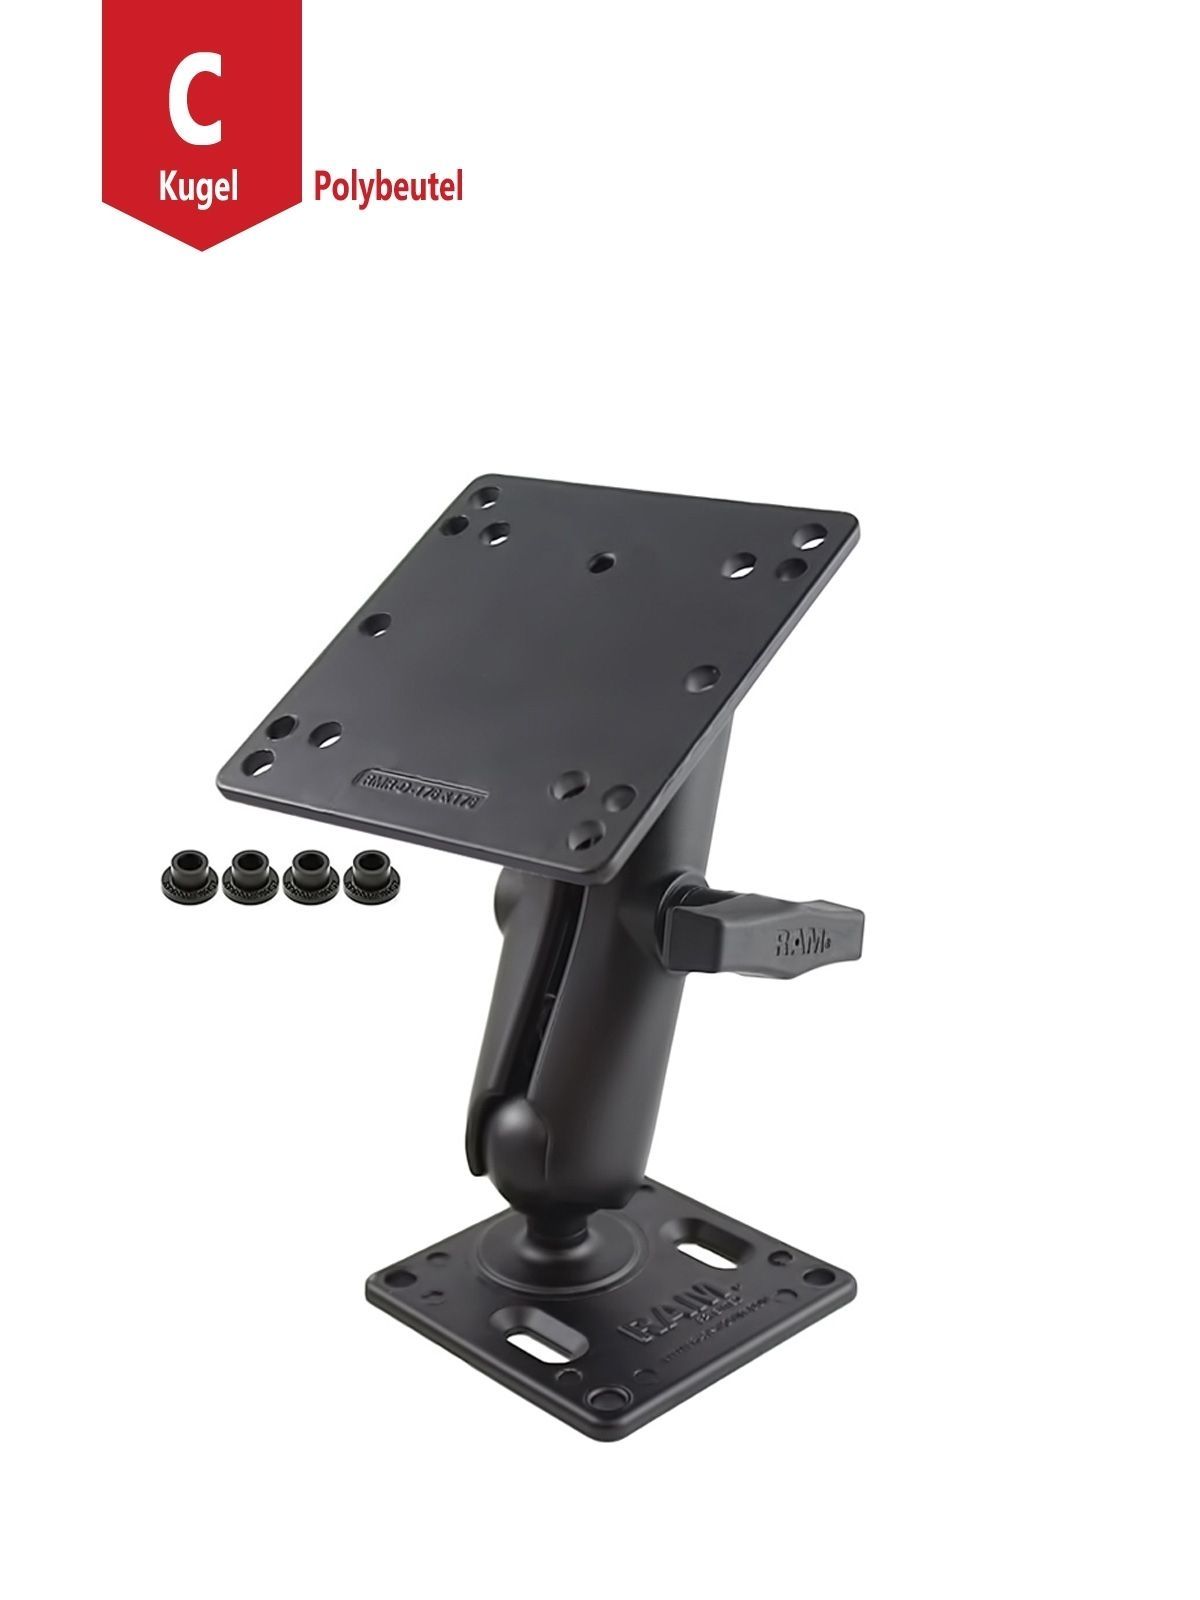 RAM MOUNT Set C Ball (1.5") with 2 VESA Square Bases and Connecting Arm (5.5") - RAM-246-2461U